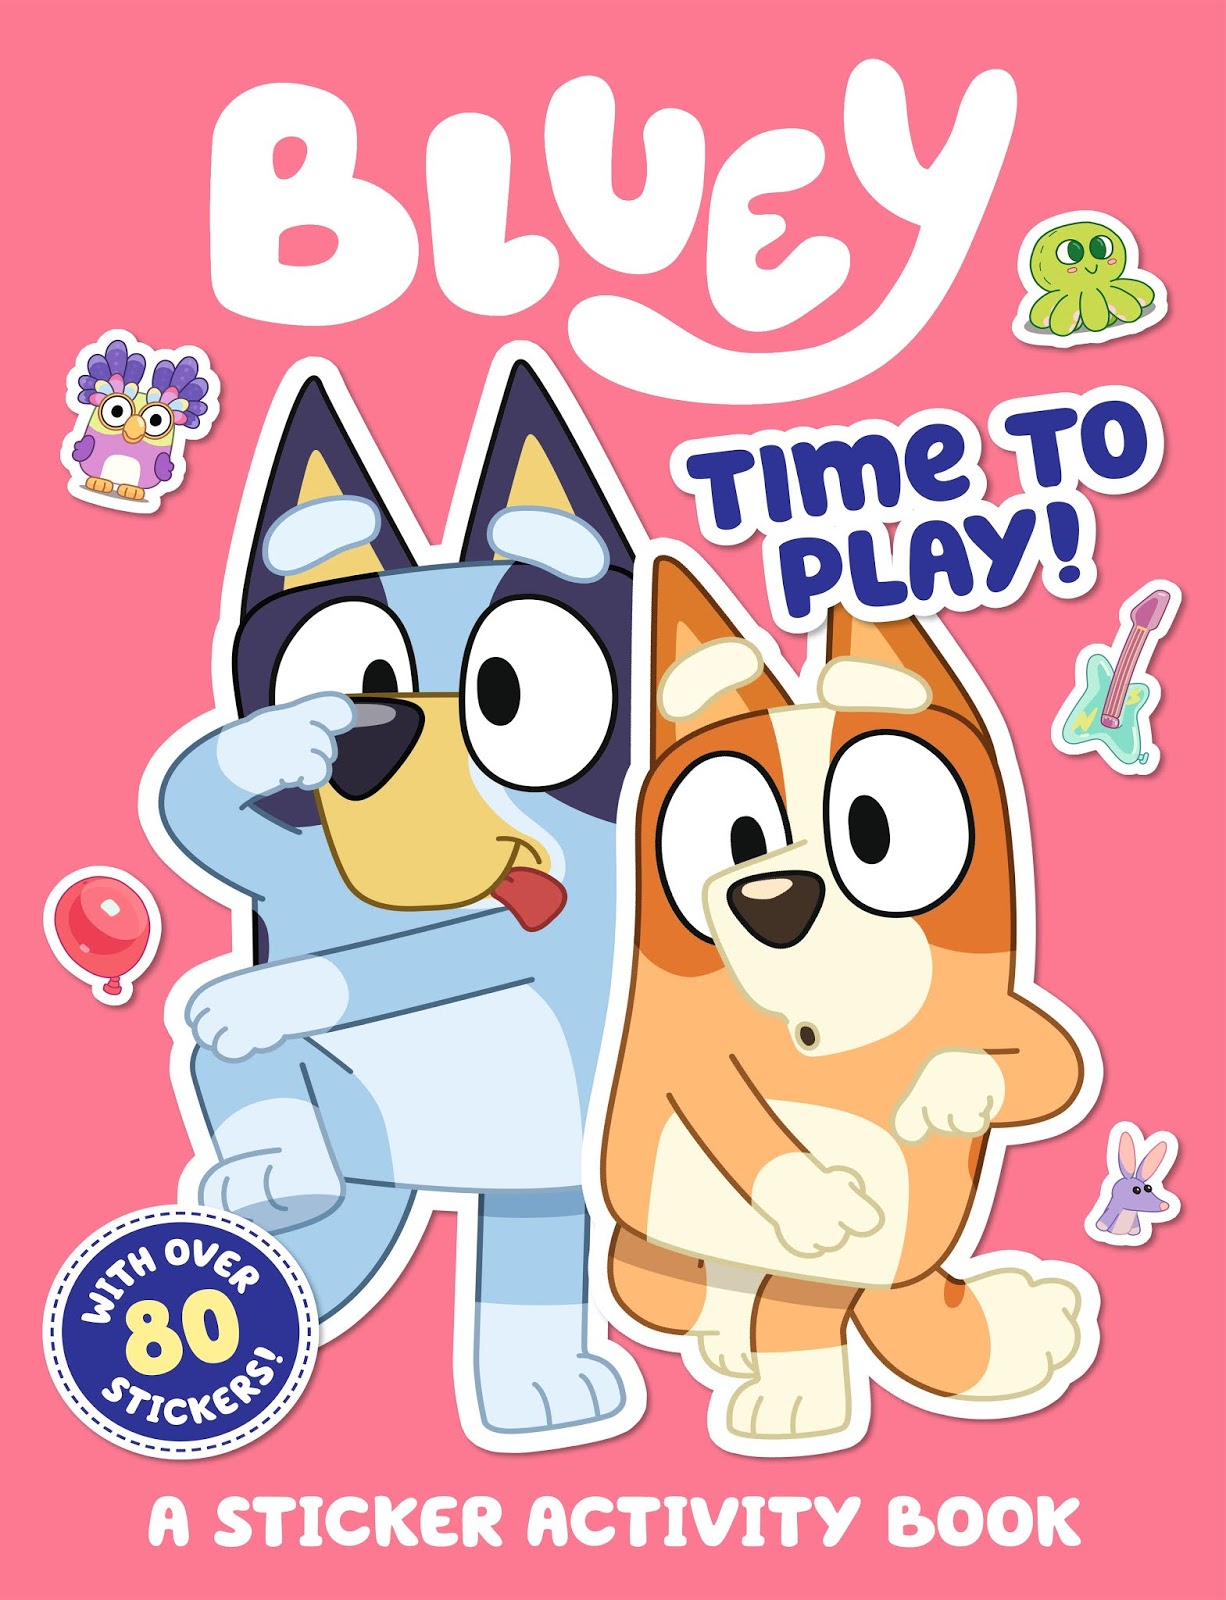 Kids Book Review Review Bluey The Beach Fruit Bat And Time To Play